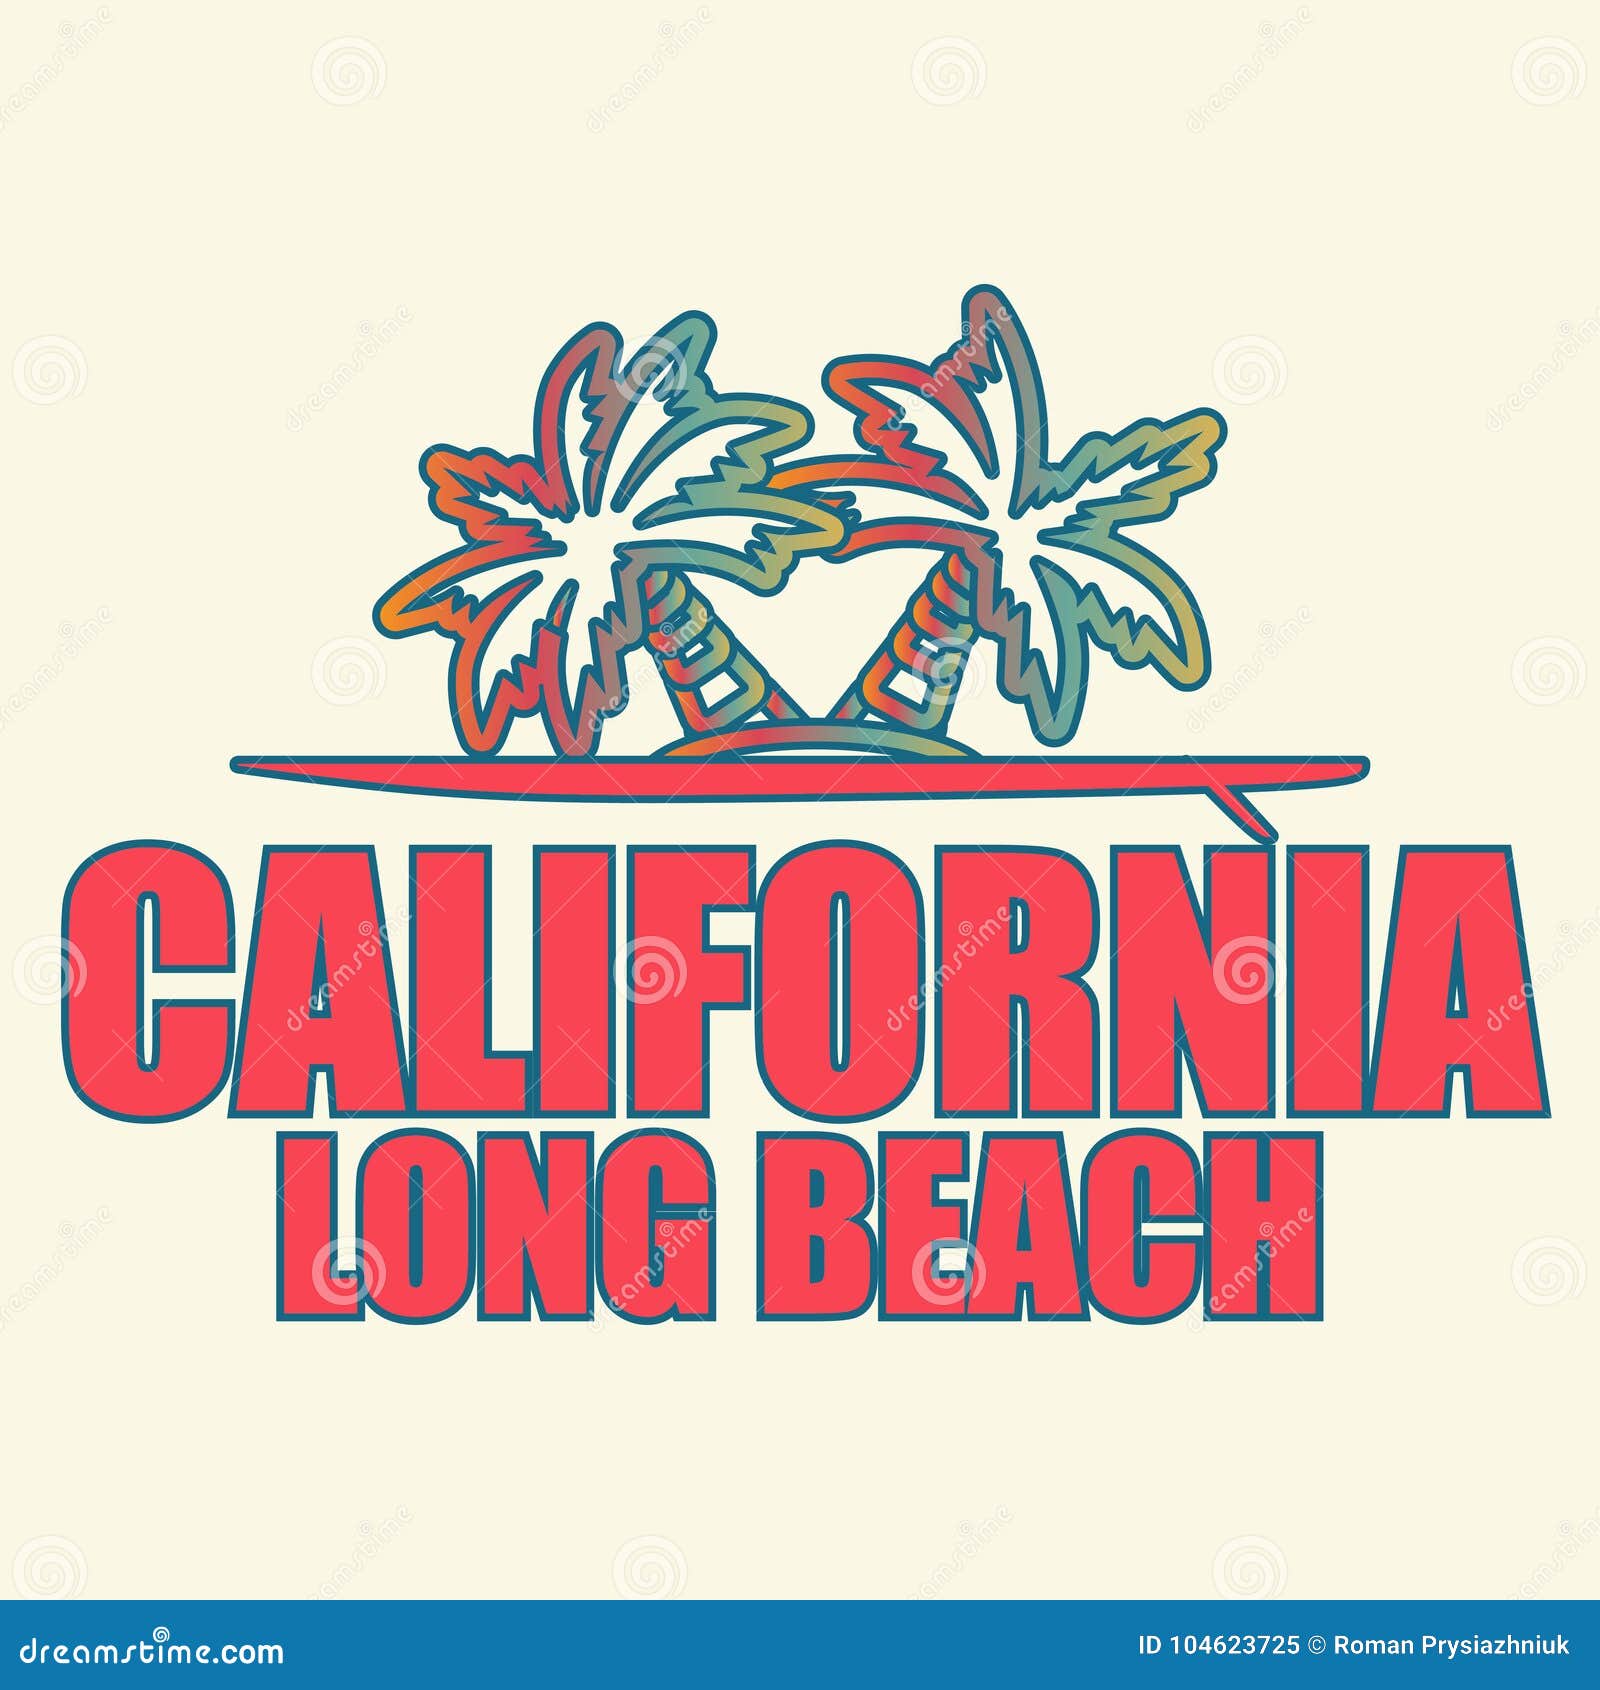 California Long Beach - Vector Illustration for T-shirt and Other Print ...